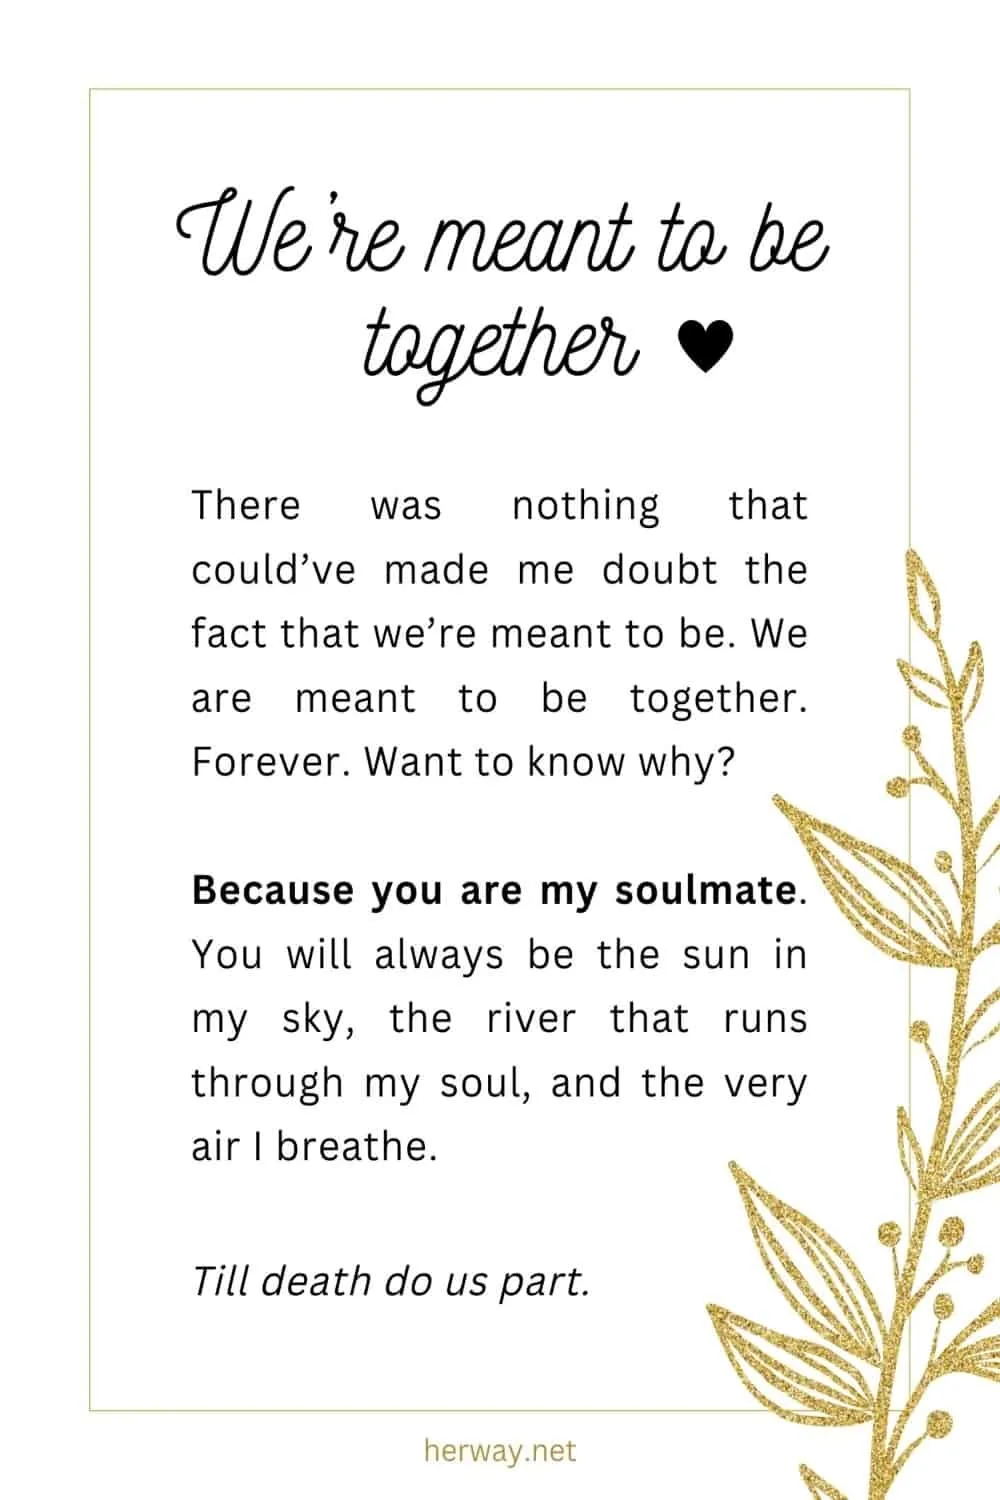 A letter for him which describes how We’re meant to be together